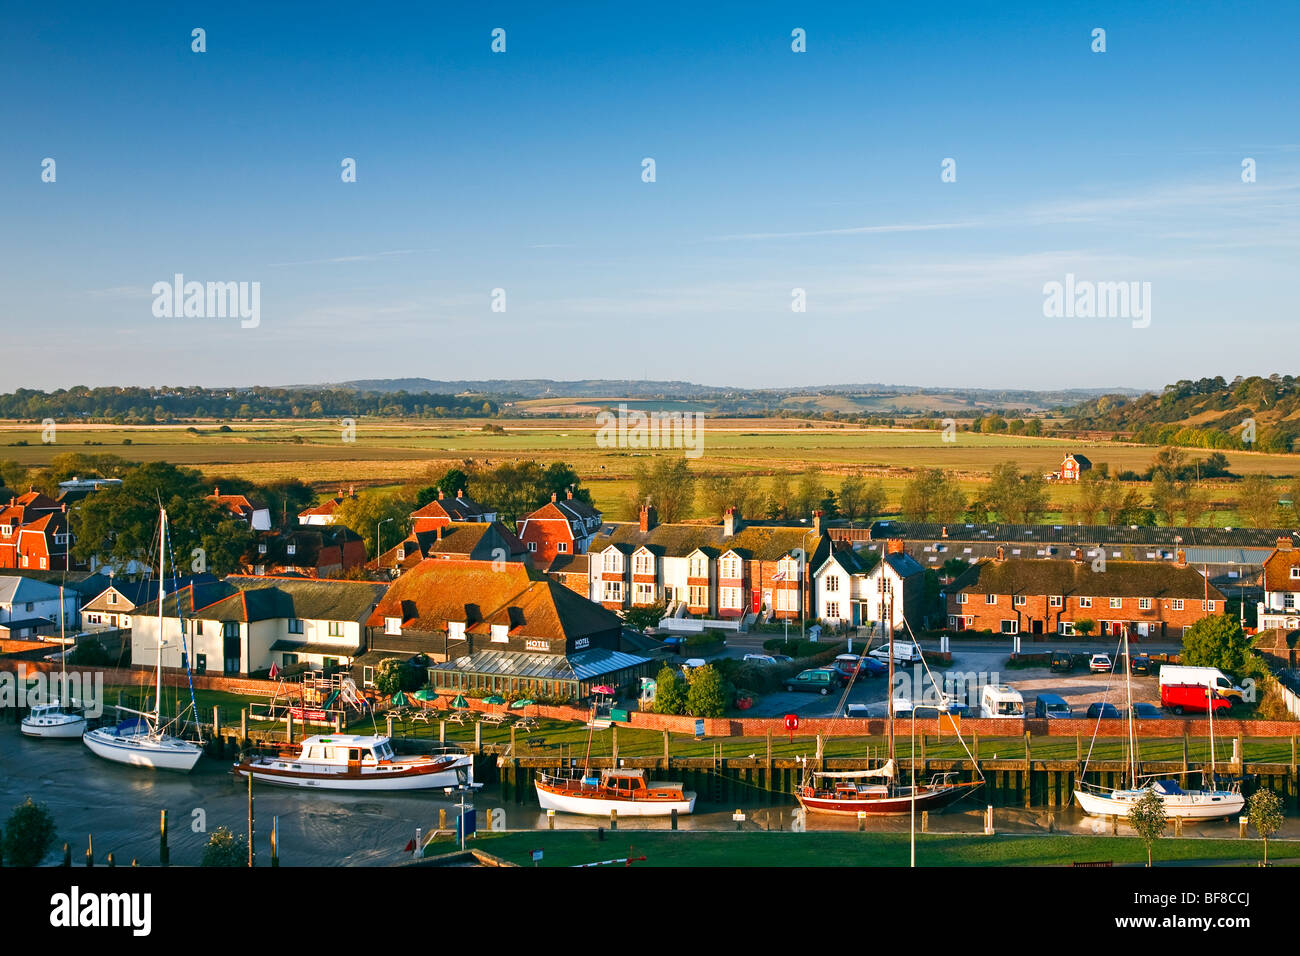 An evening view of Strand Quay and the Sussex countryside beyond from Rye, East Sussex, England, UK 2009 Stock Photo